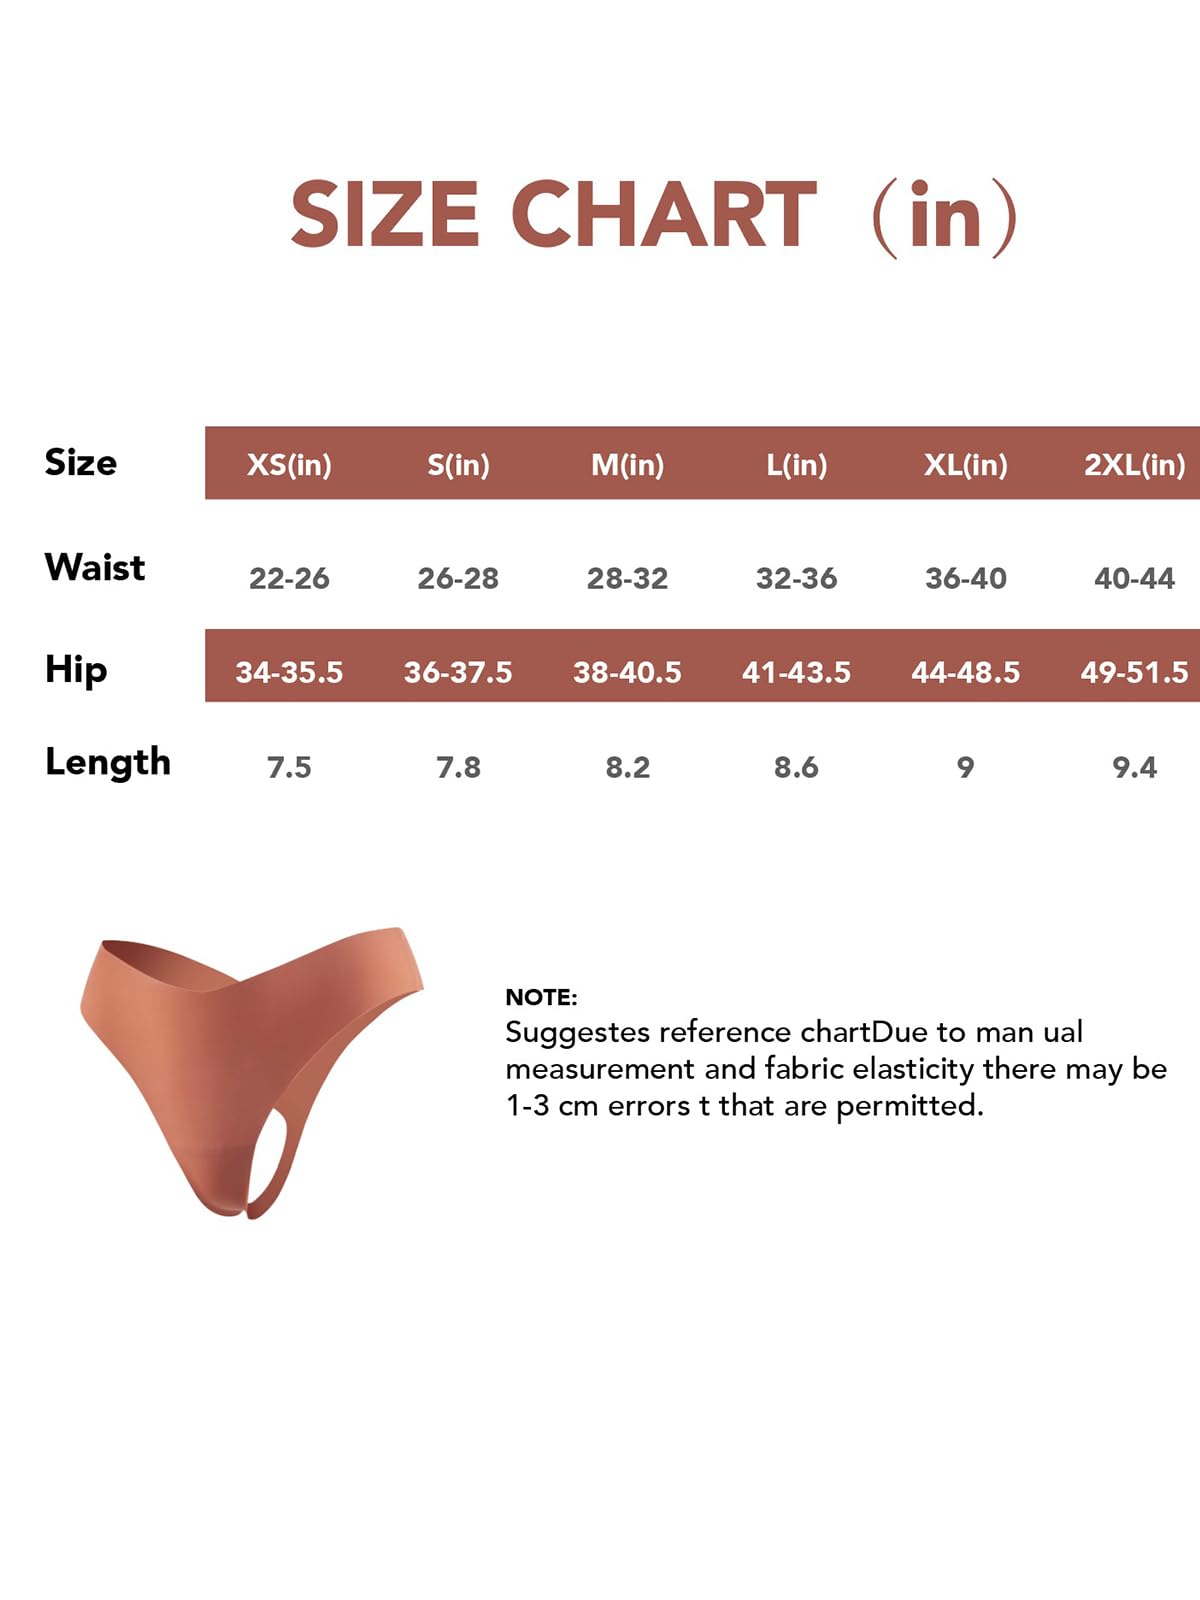 tichers Seamless Thongs for Women No Show Thong V-waisted Stretch Breathable Sexy Panties Underwear 6 Pack